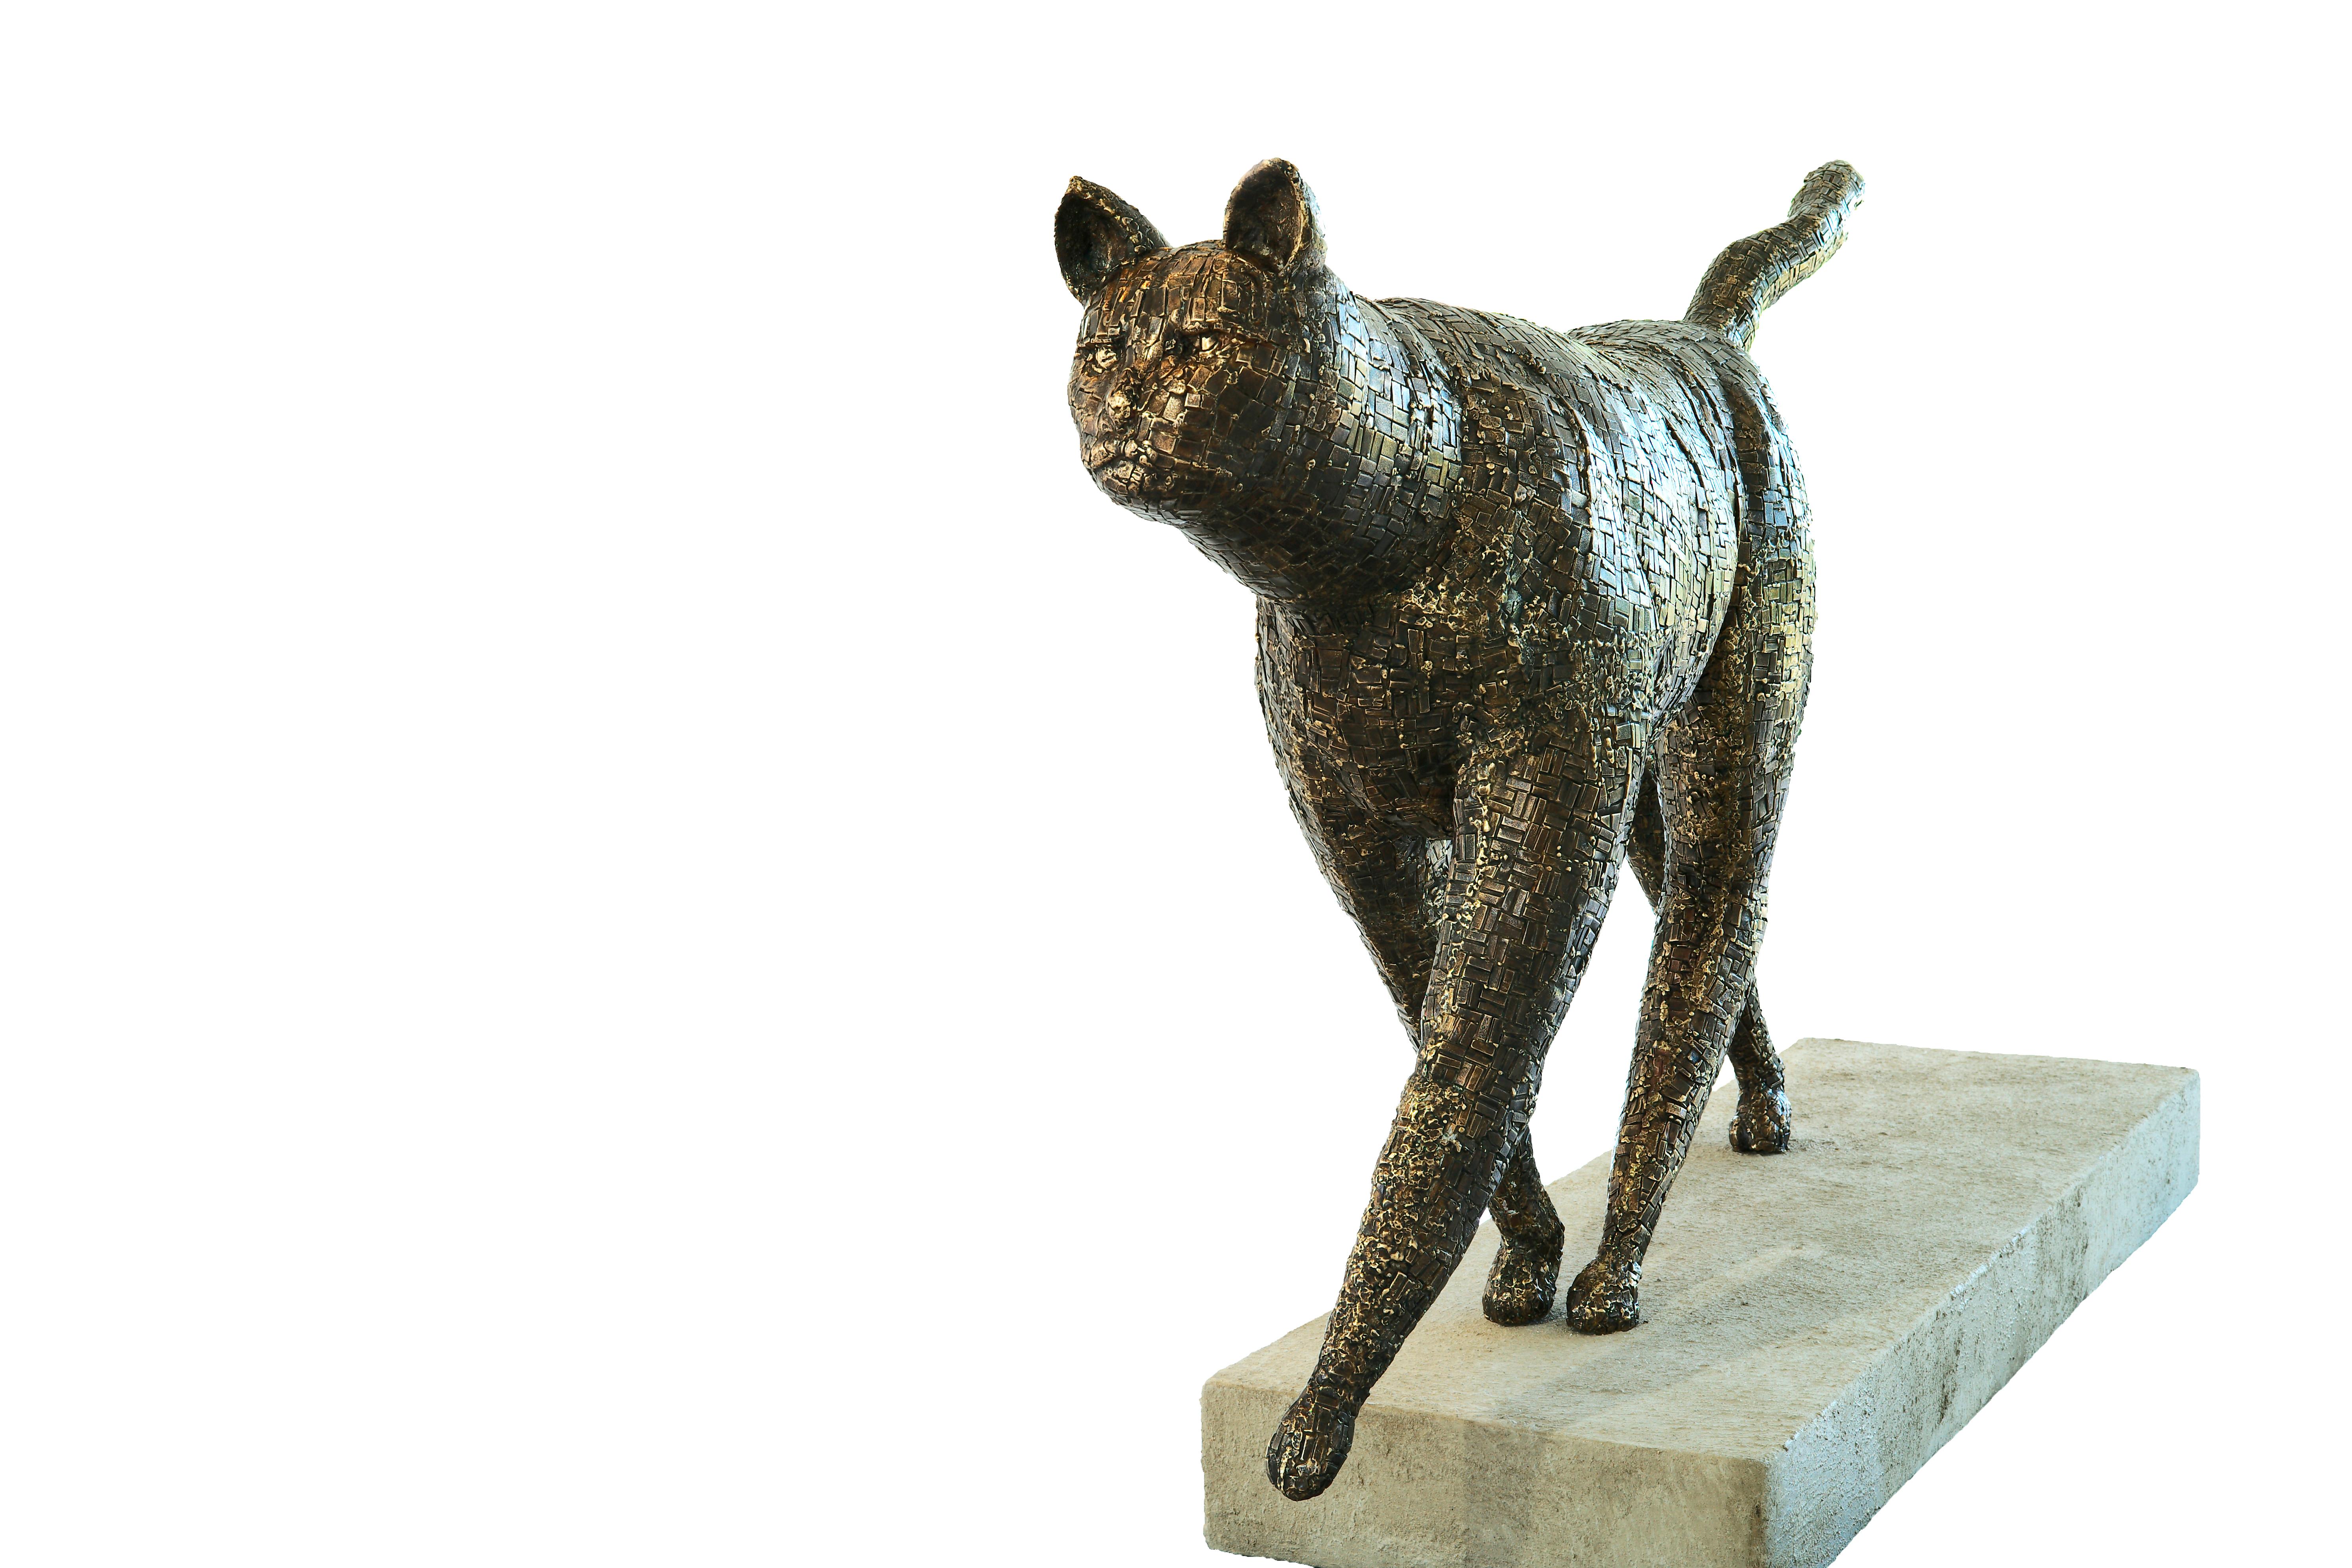 Mary Block
Walking Cat
bronze
39h x 65w x 15d in
99.06h x 165.10w x 38.10d cm
MBK001

Mary Block
b. 1951, St. Louis, MO

Education

1975	Mechanical Engineering Department, Stainless Steel Casting in Cooperation with Alloy Casting Corporation. 
     